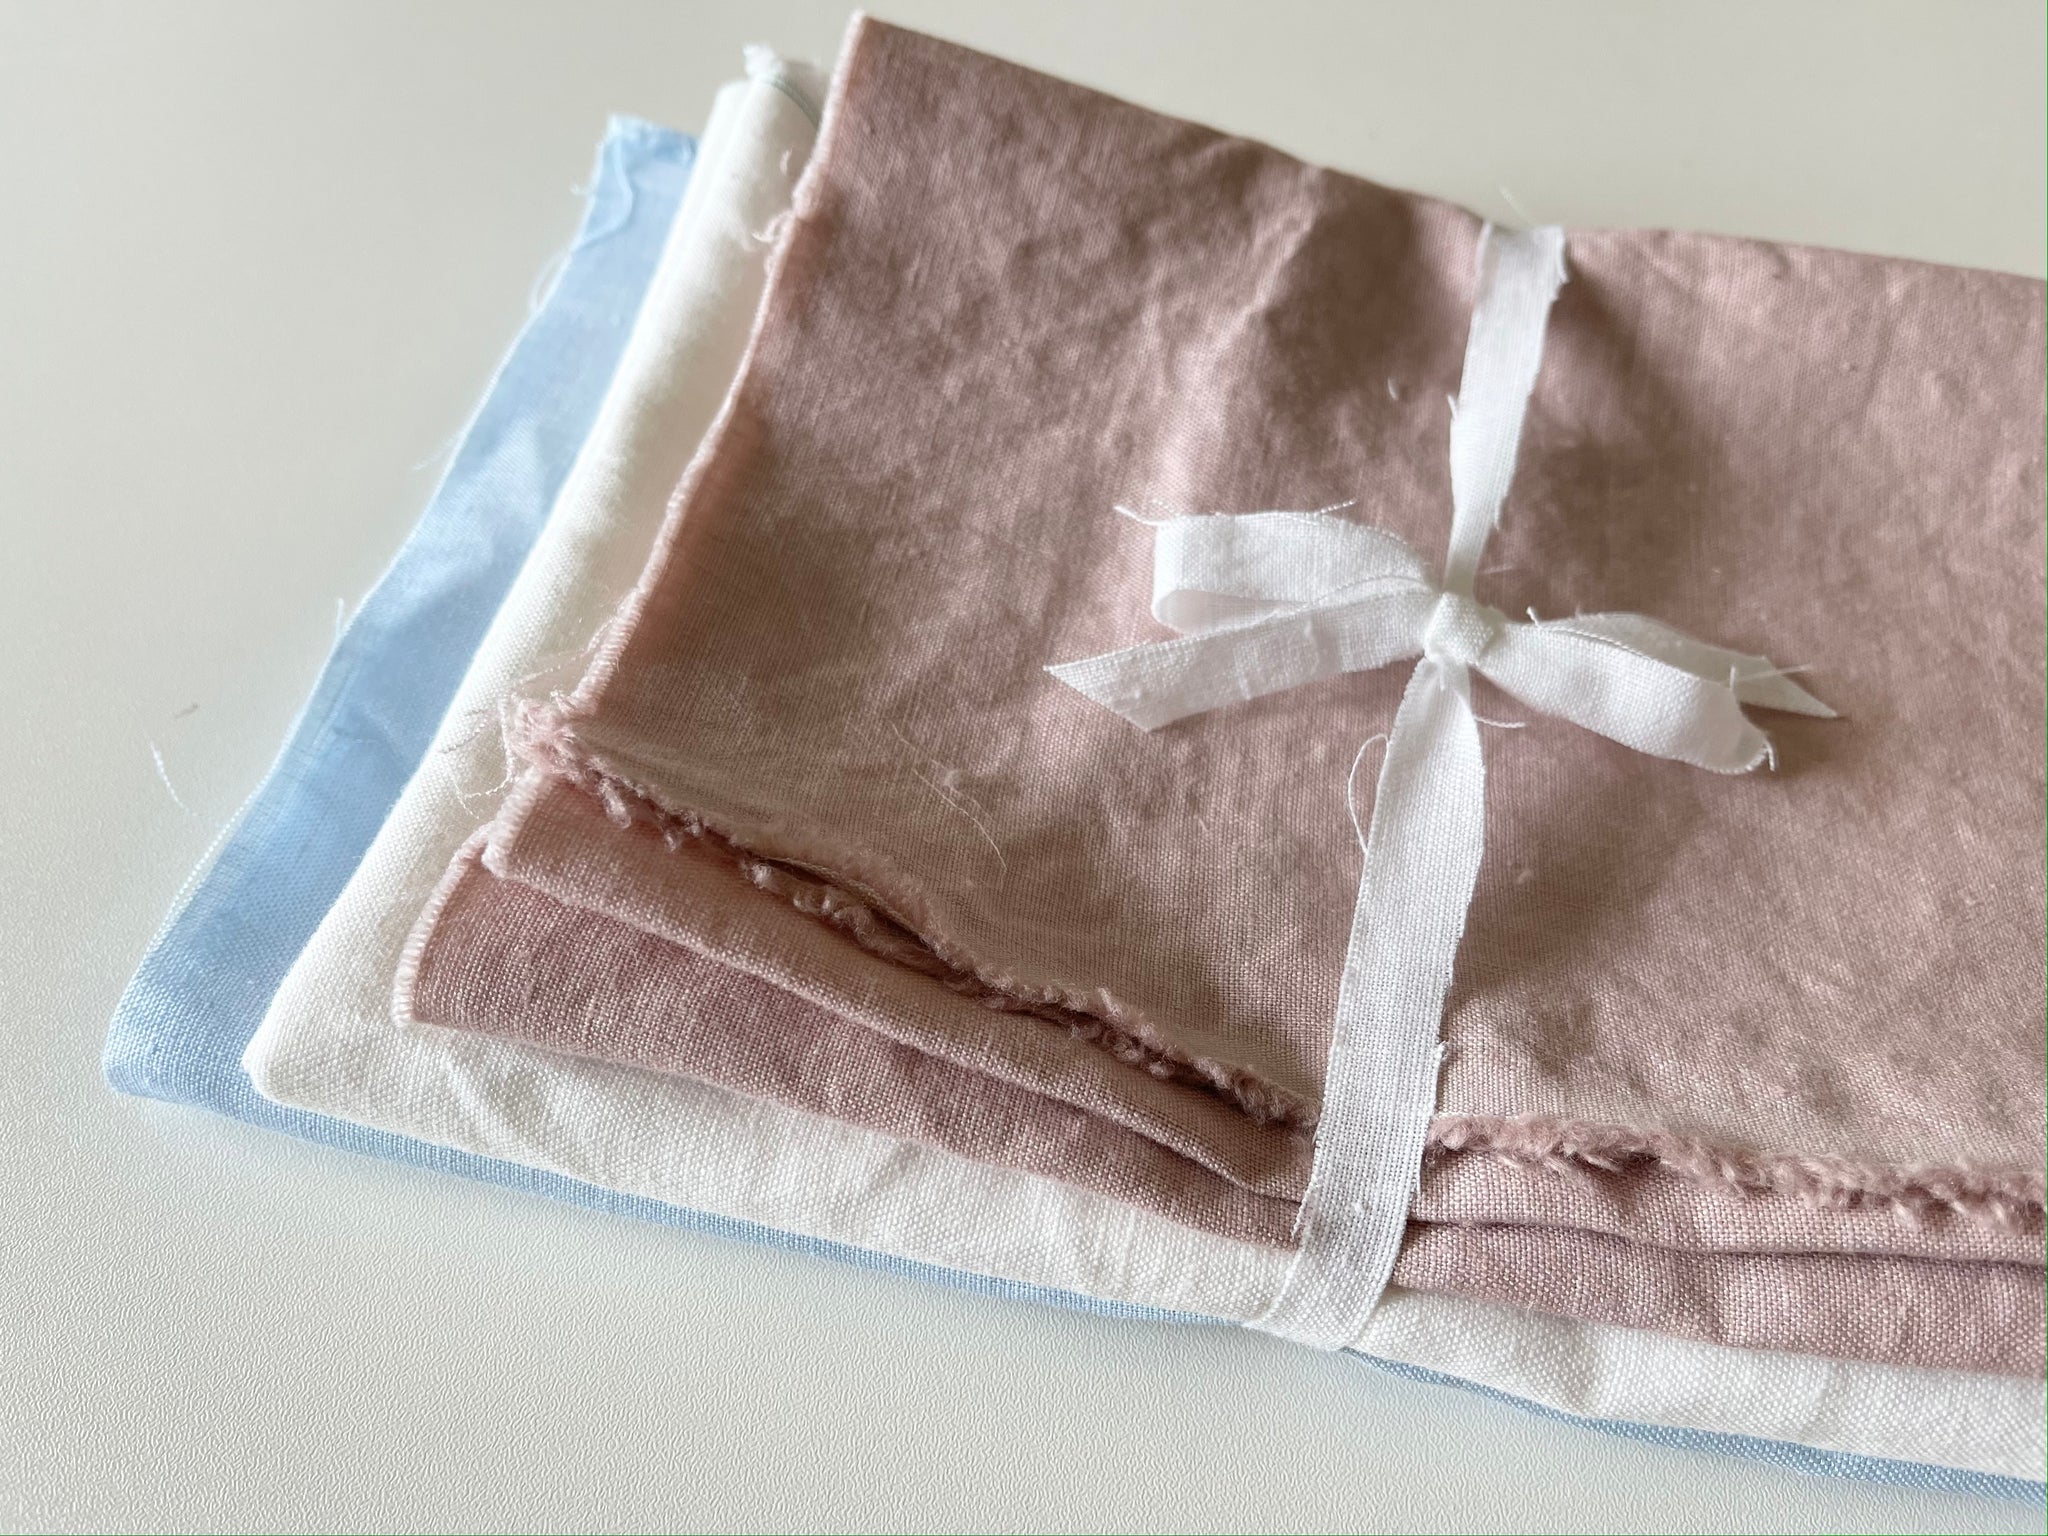 Linen Fabric Remnants - Dusty Rose, Pure White, Light Blue